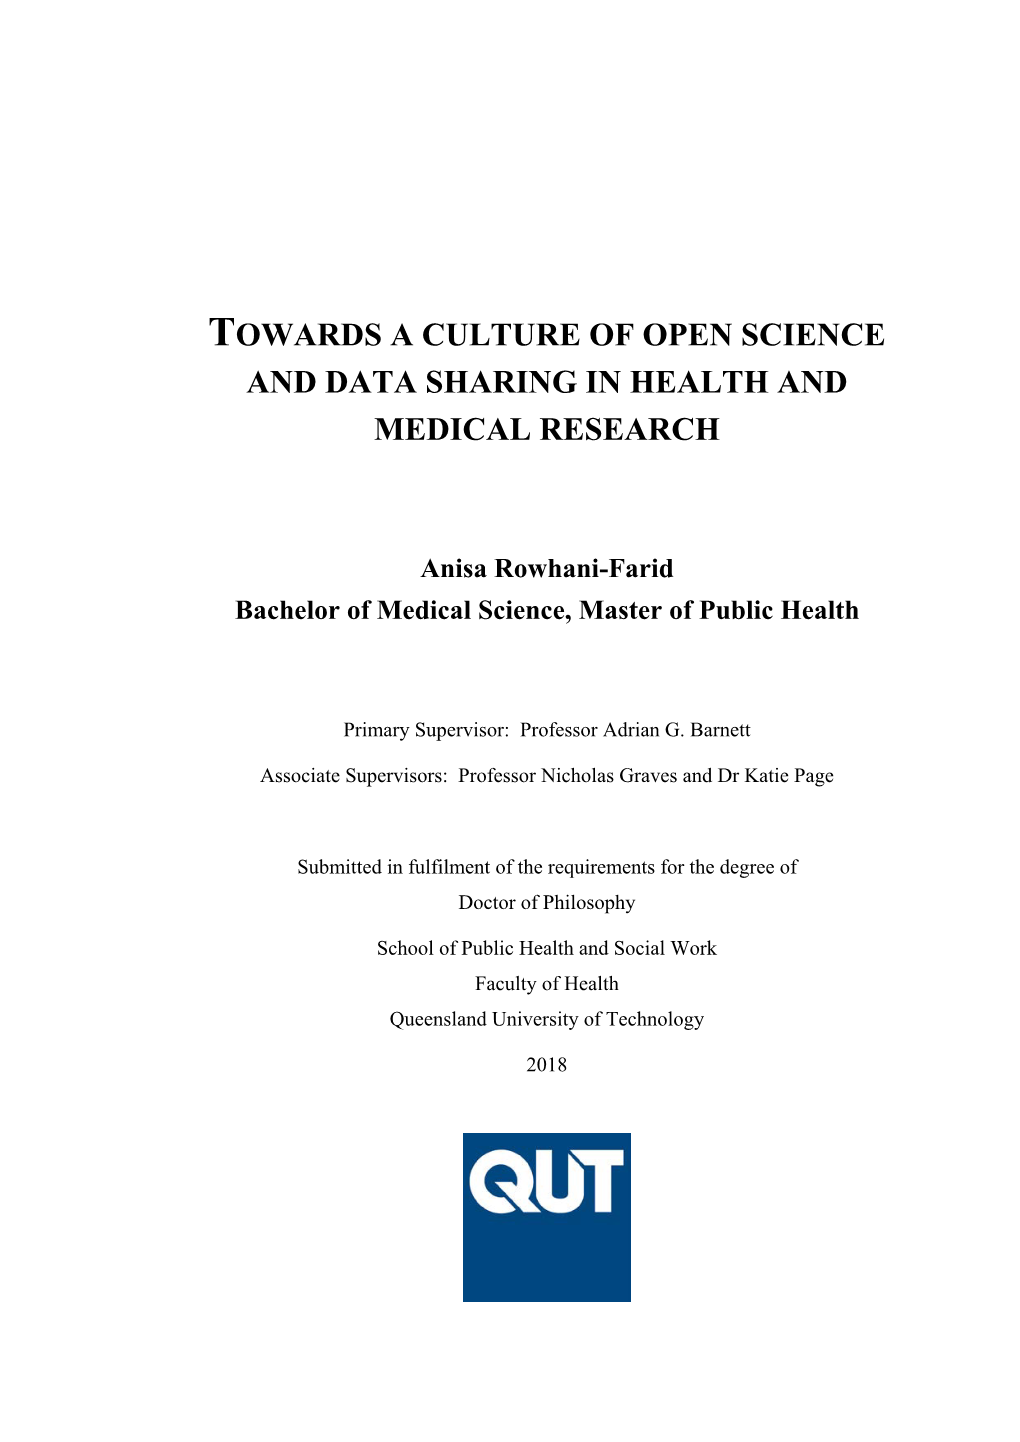 Towards a Culture of Open Science and Data Sharing in Health and Medical Research